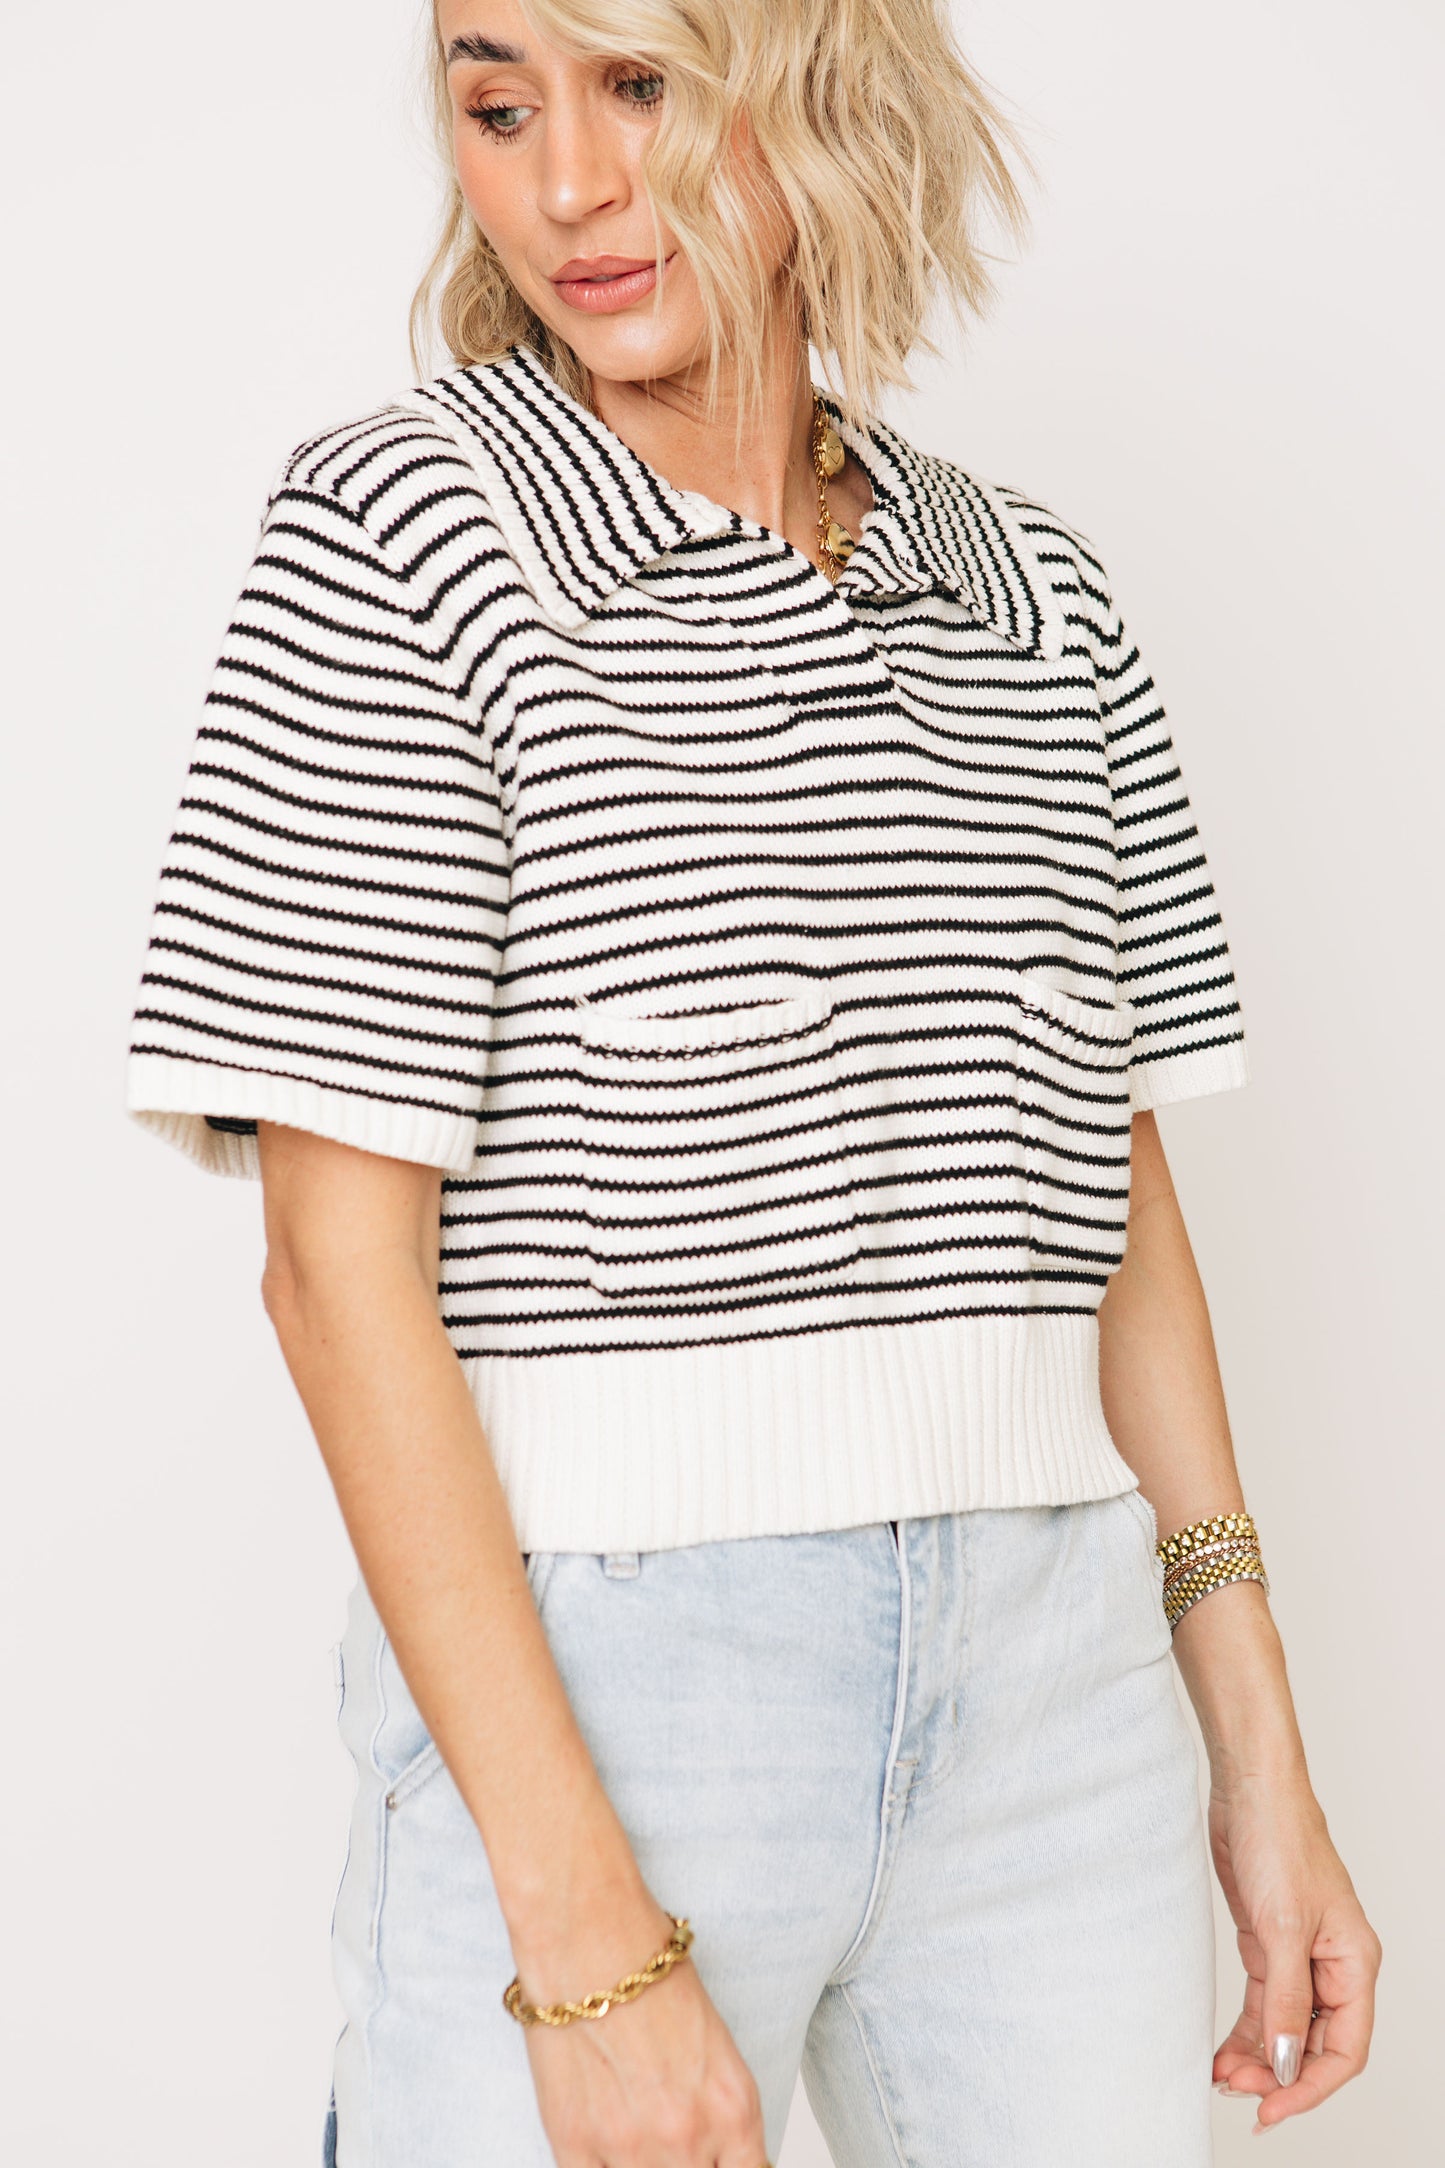 Harmony Stripe Knit Top With Front Pocket Detail (S-L)